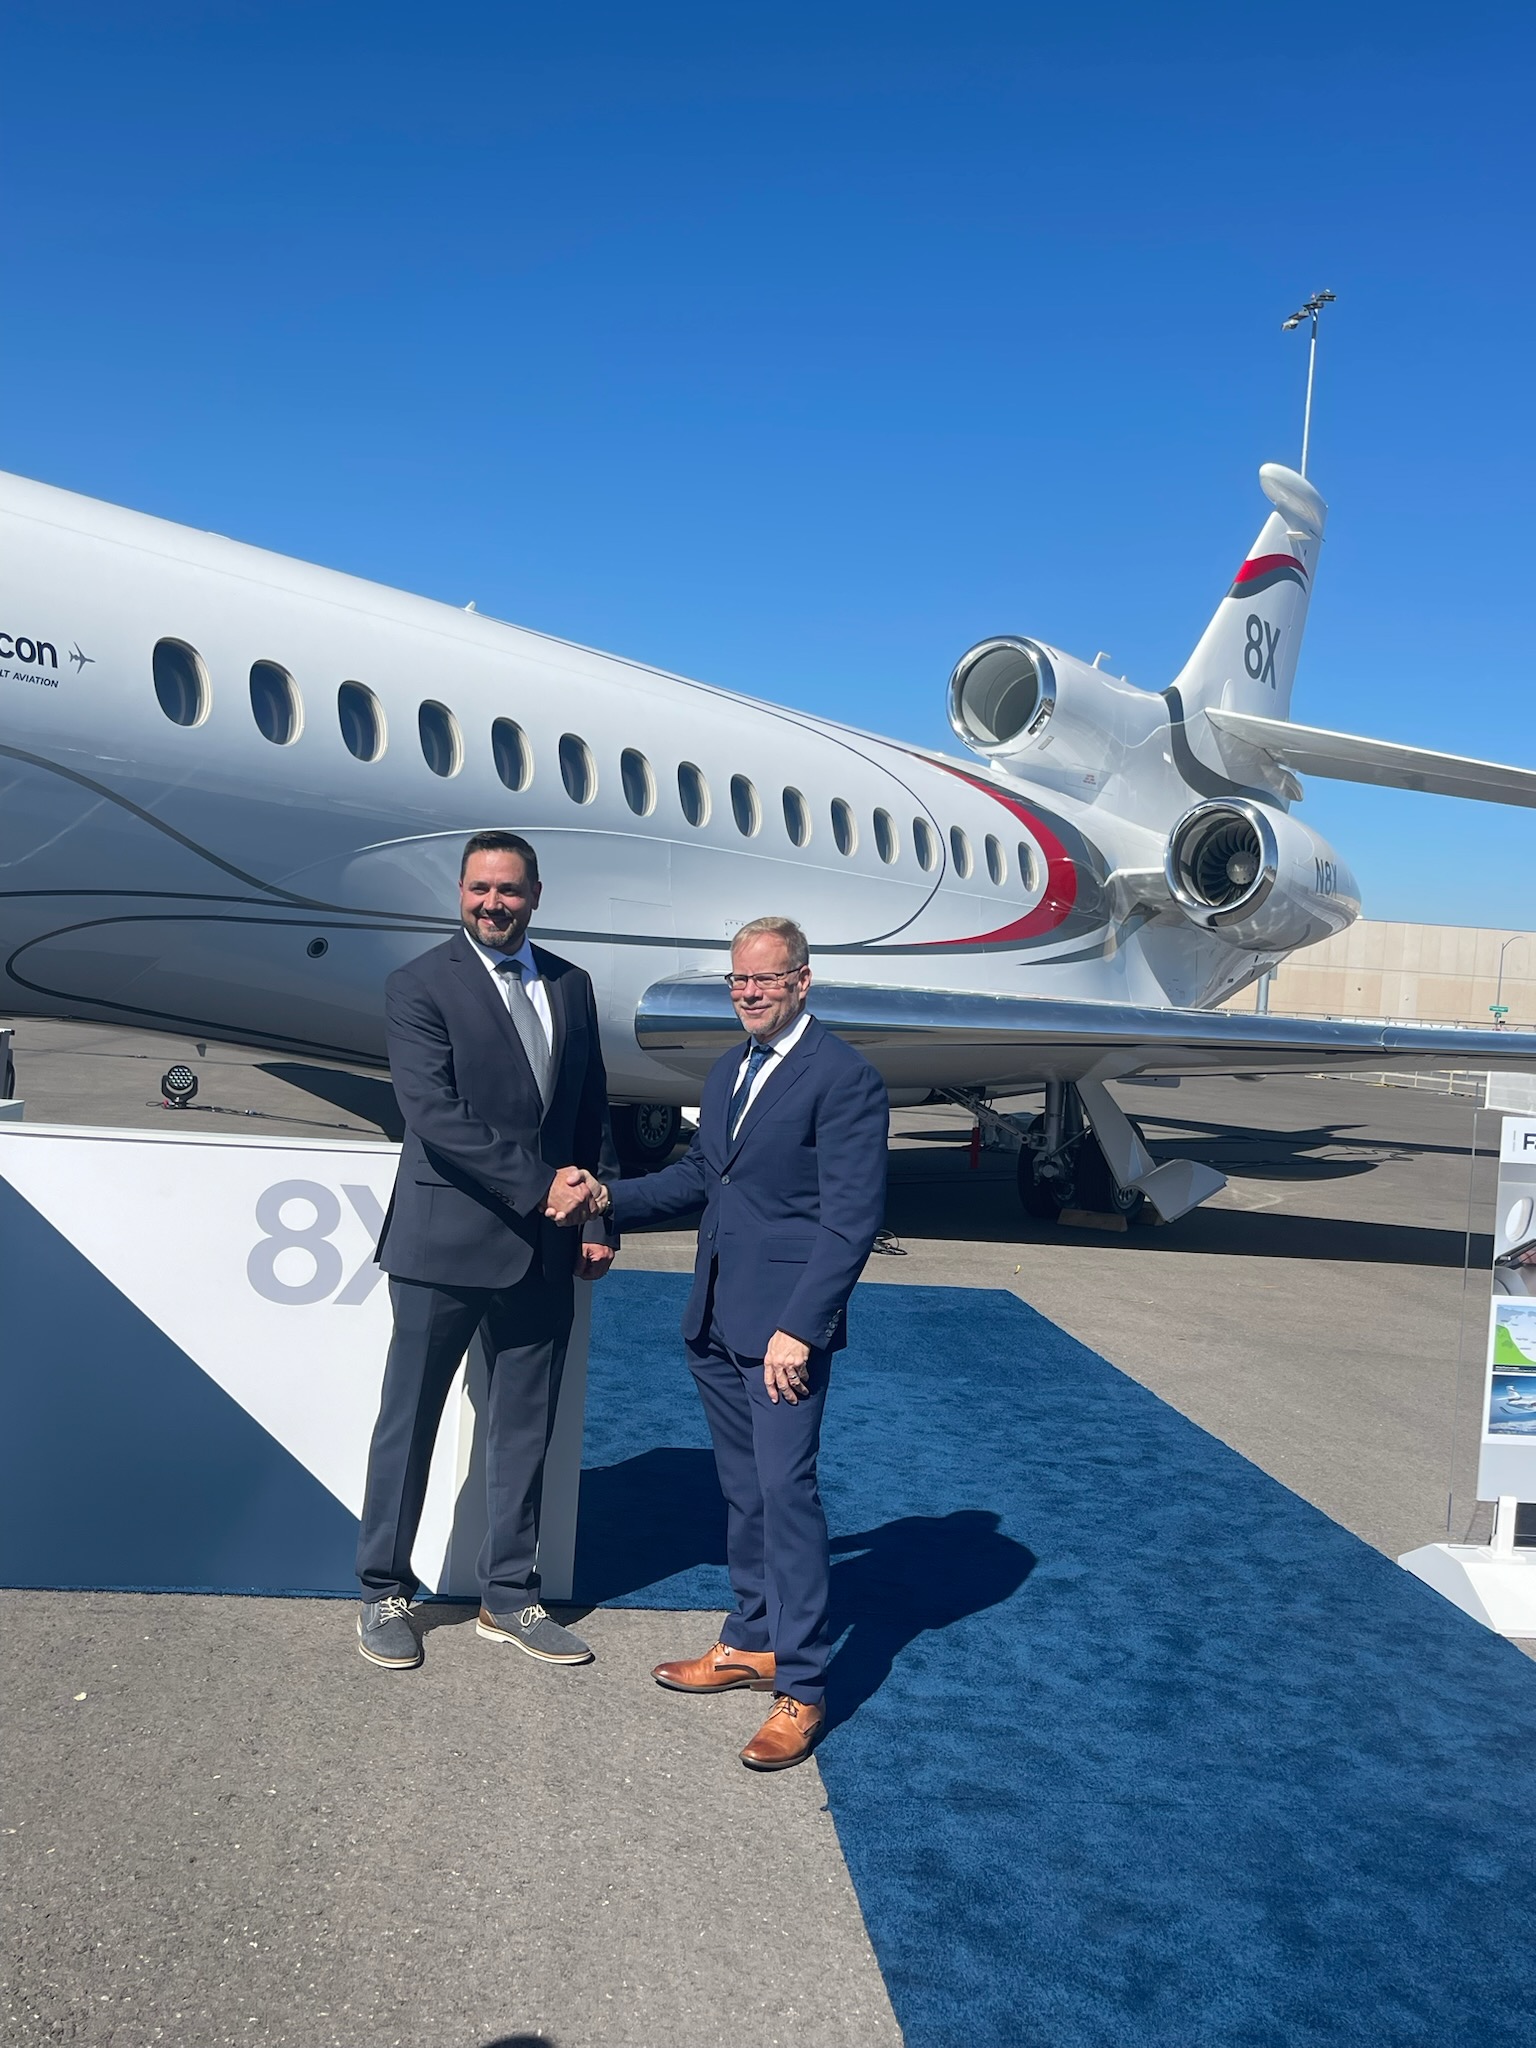 Pro Star added to Dassault Falcon Jet’s Authorized Service Network for the Northeast U.S.